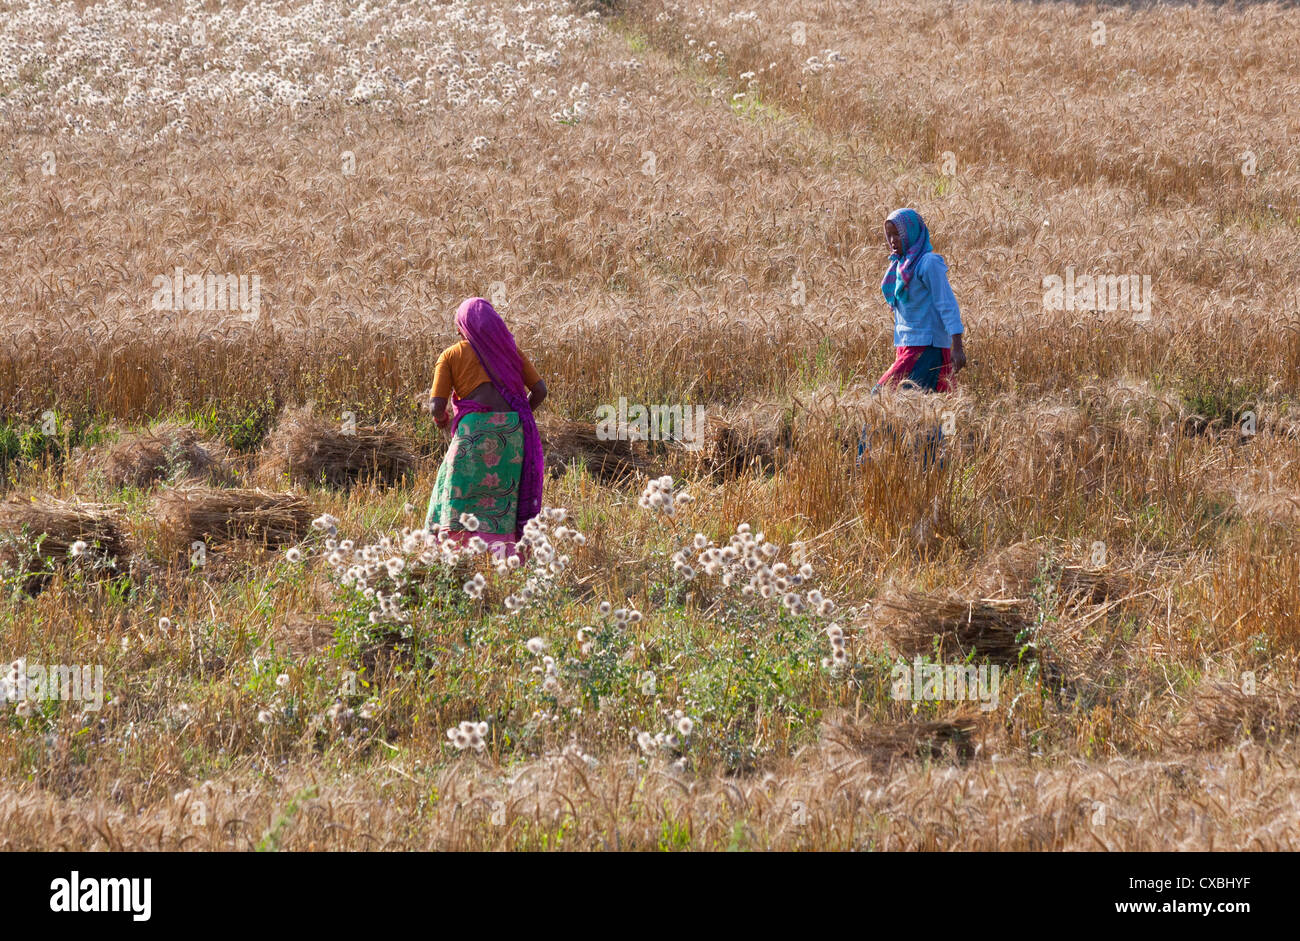 Nepalese women working in a field, Bardia National Park, Nepal Stock Photo